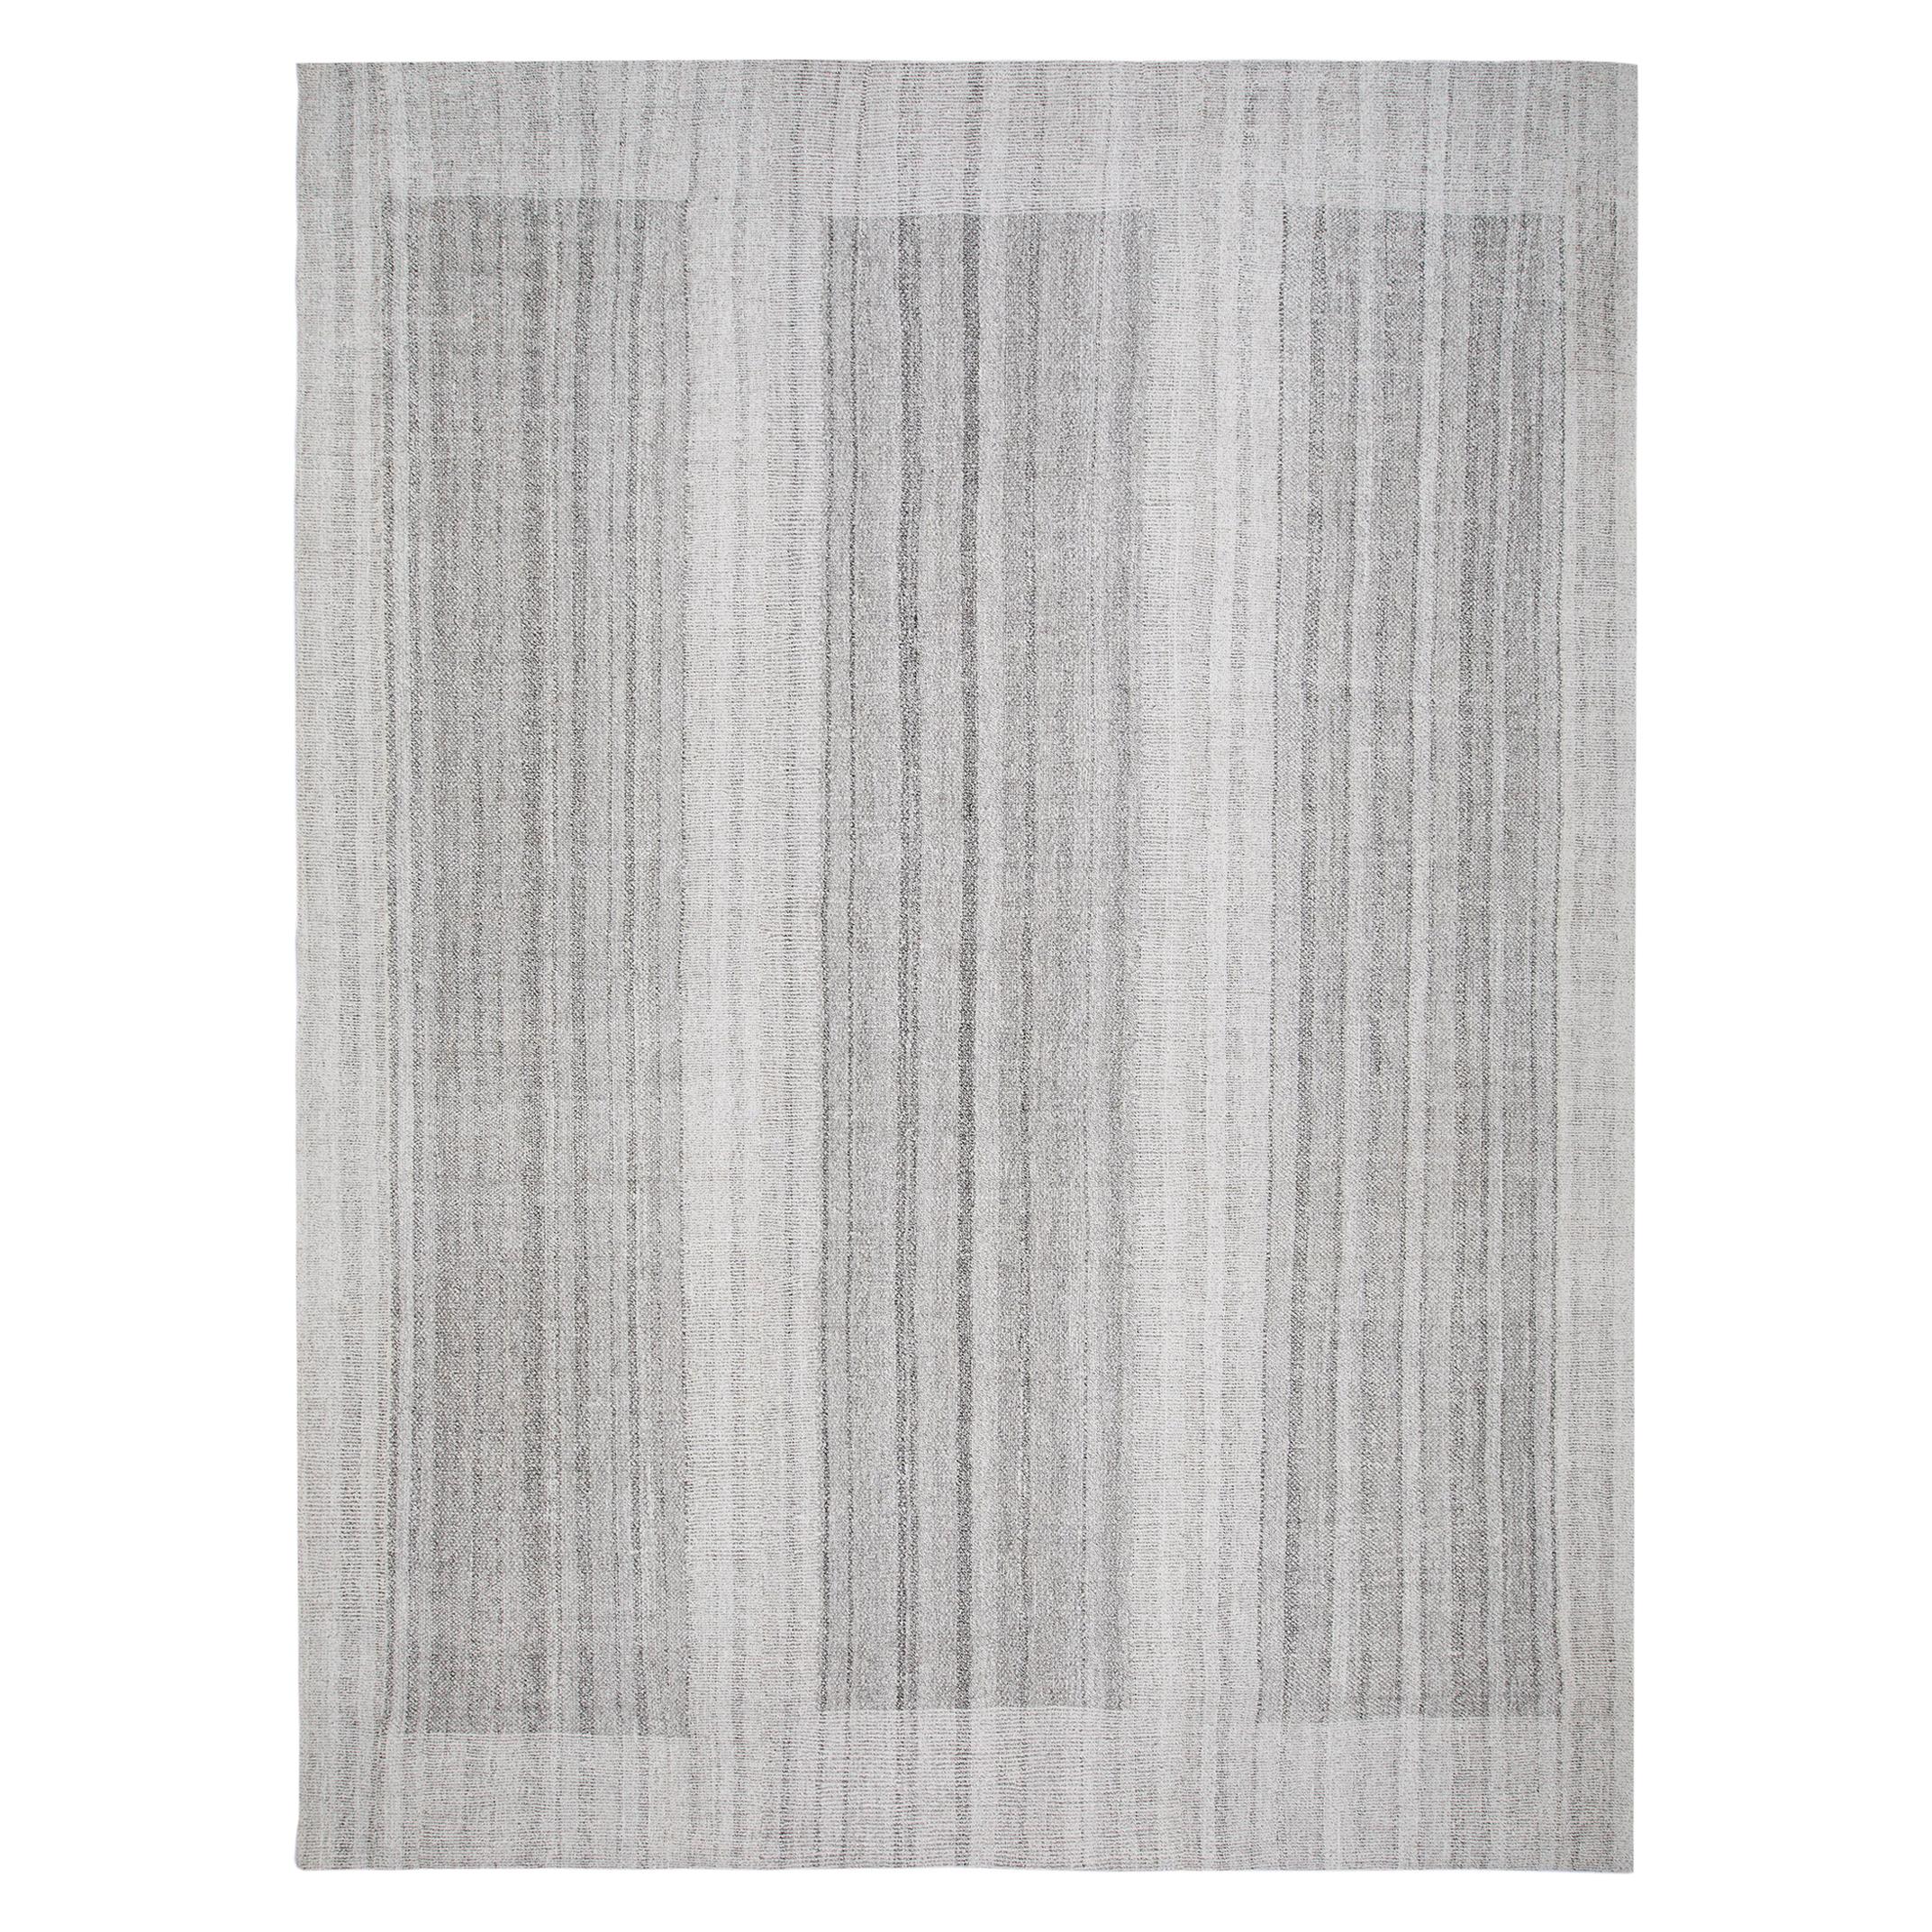 Unique Modern Handwoven Flat-Weave Textured Rug in Shades of Grey For Sale